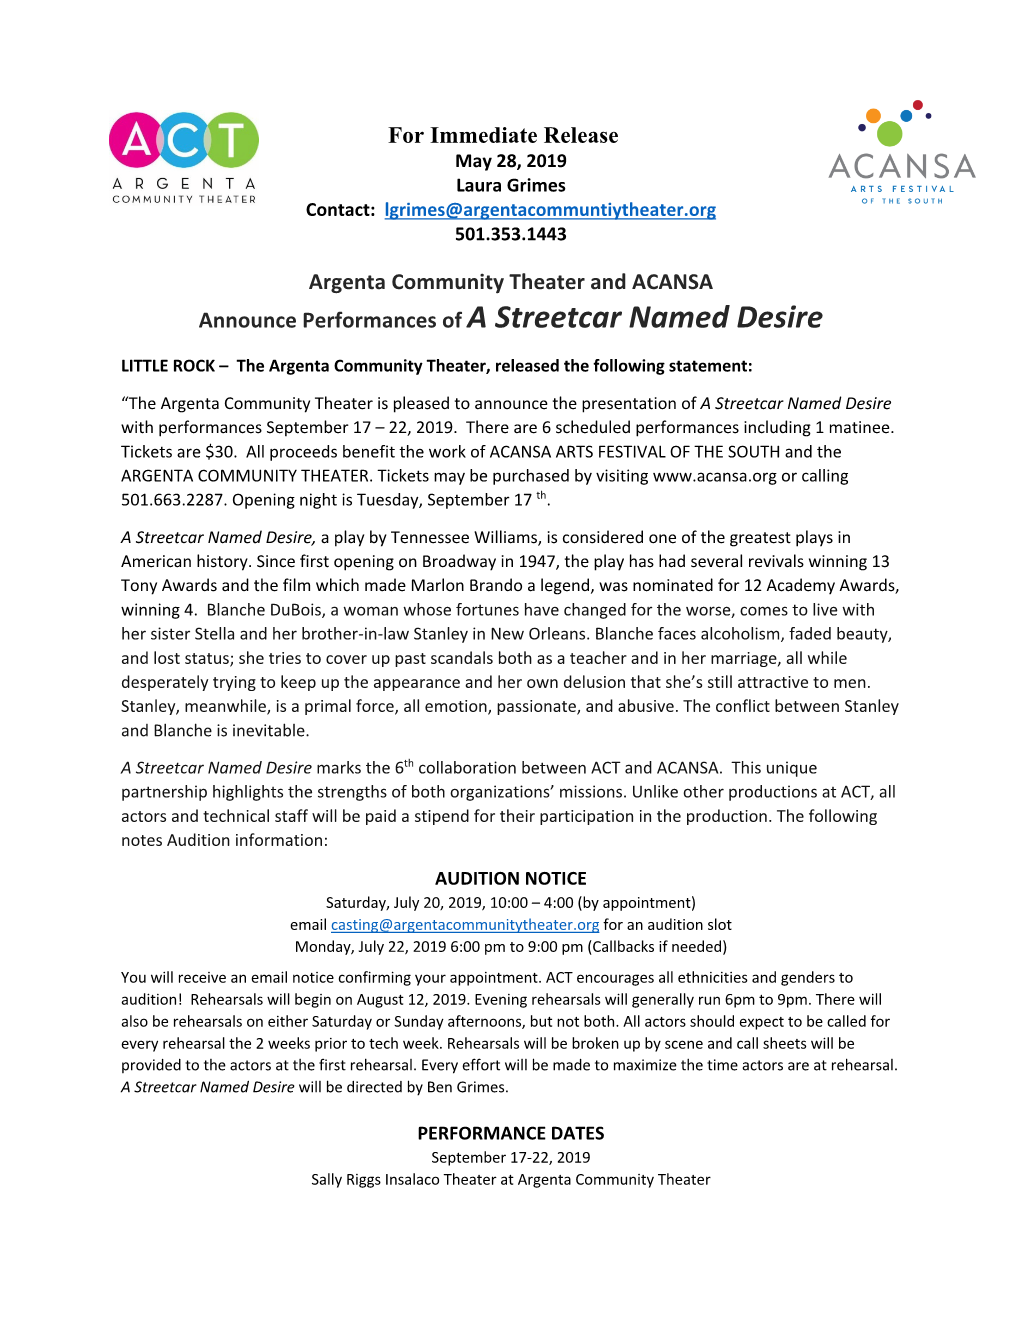 For Immediate Release Argenta Community Theater and ACANSA